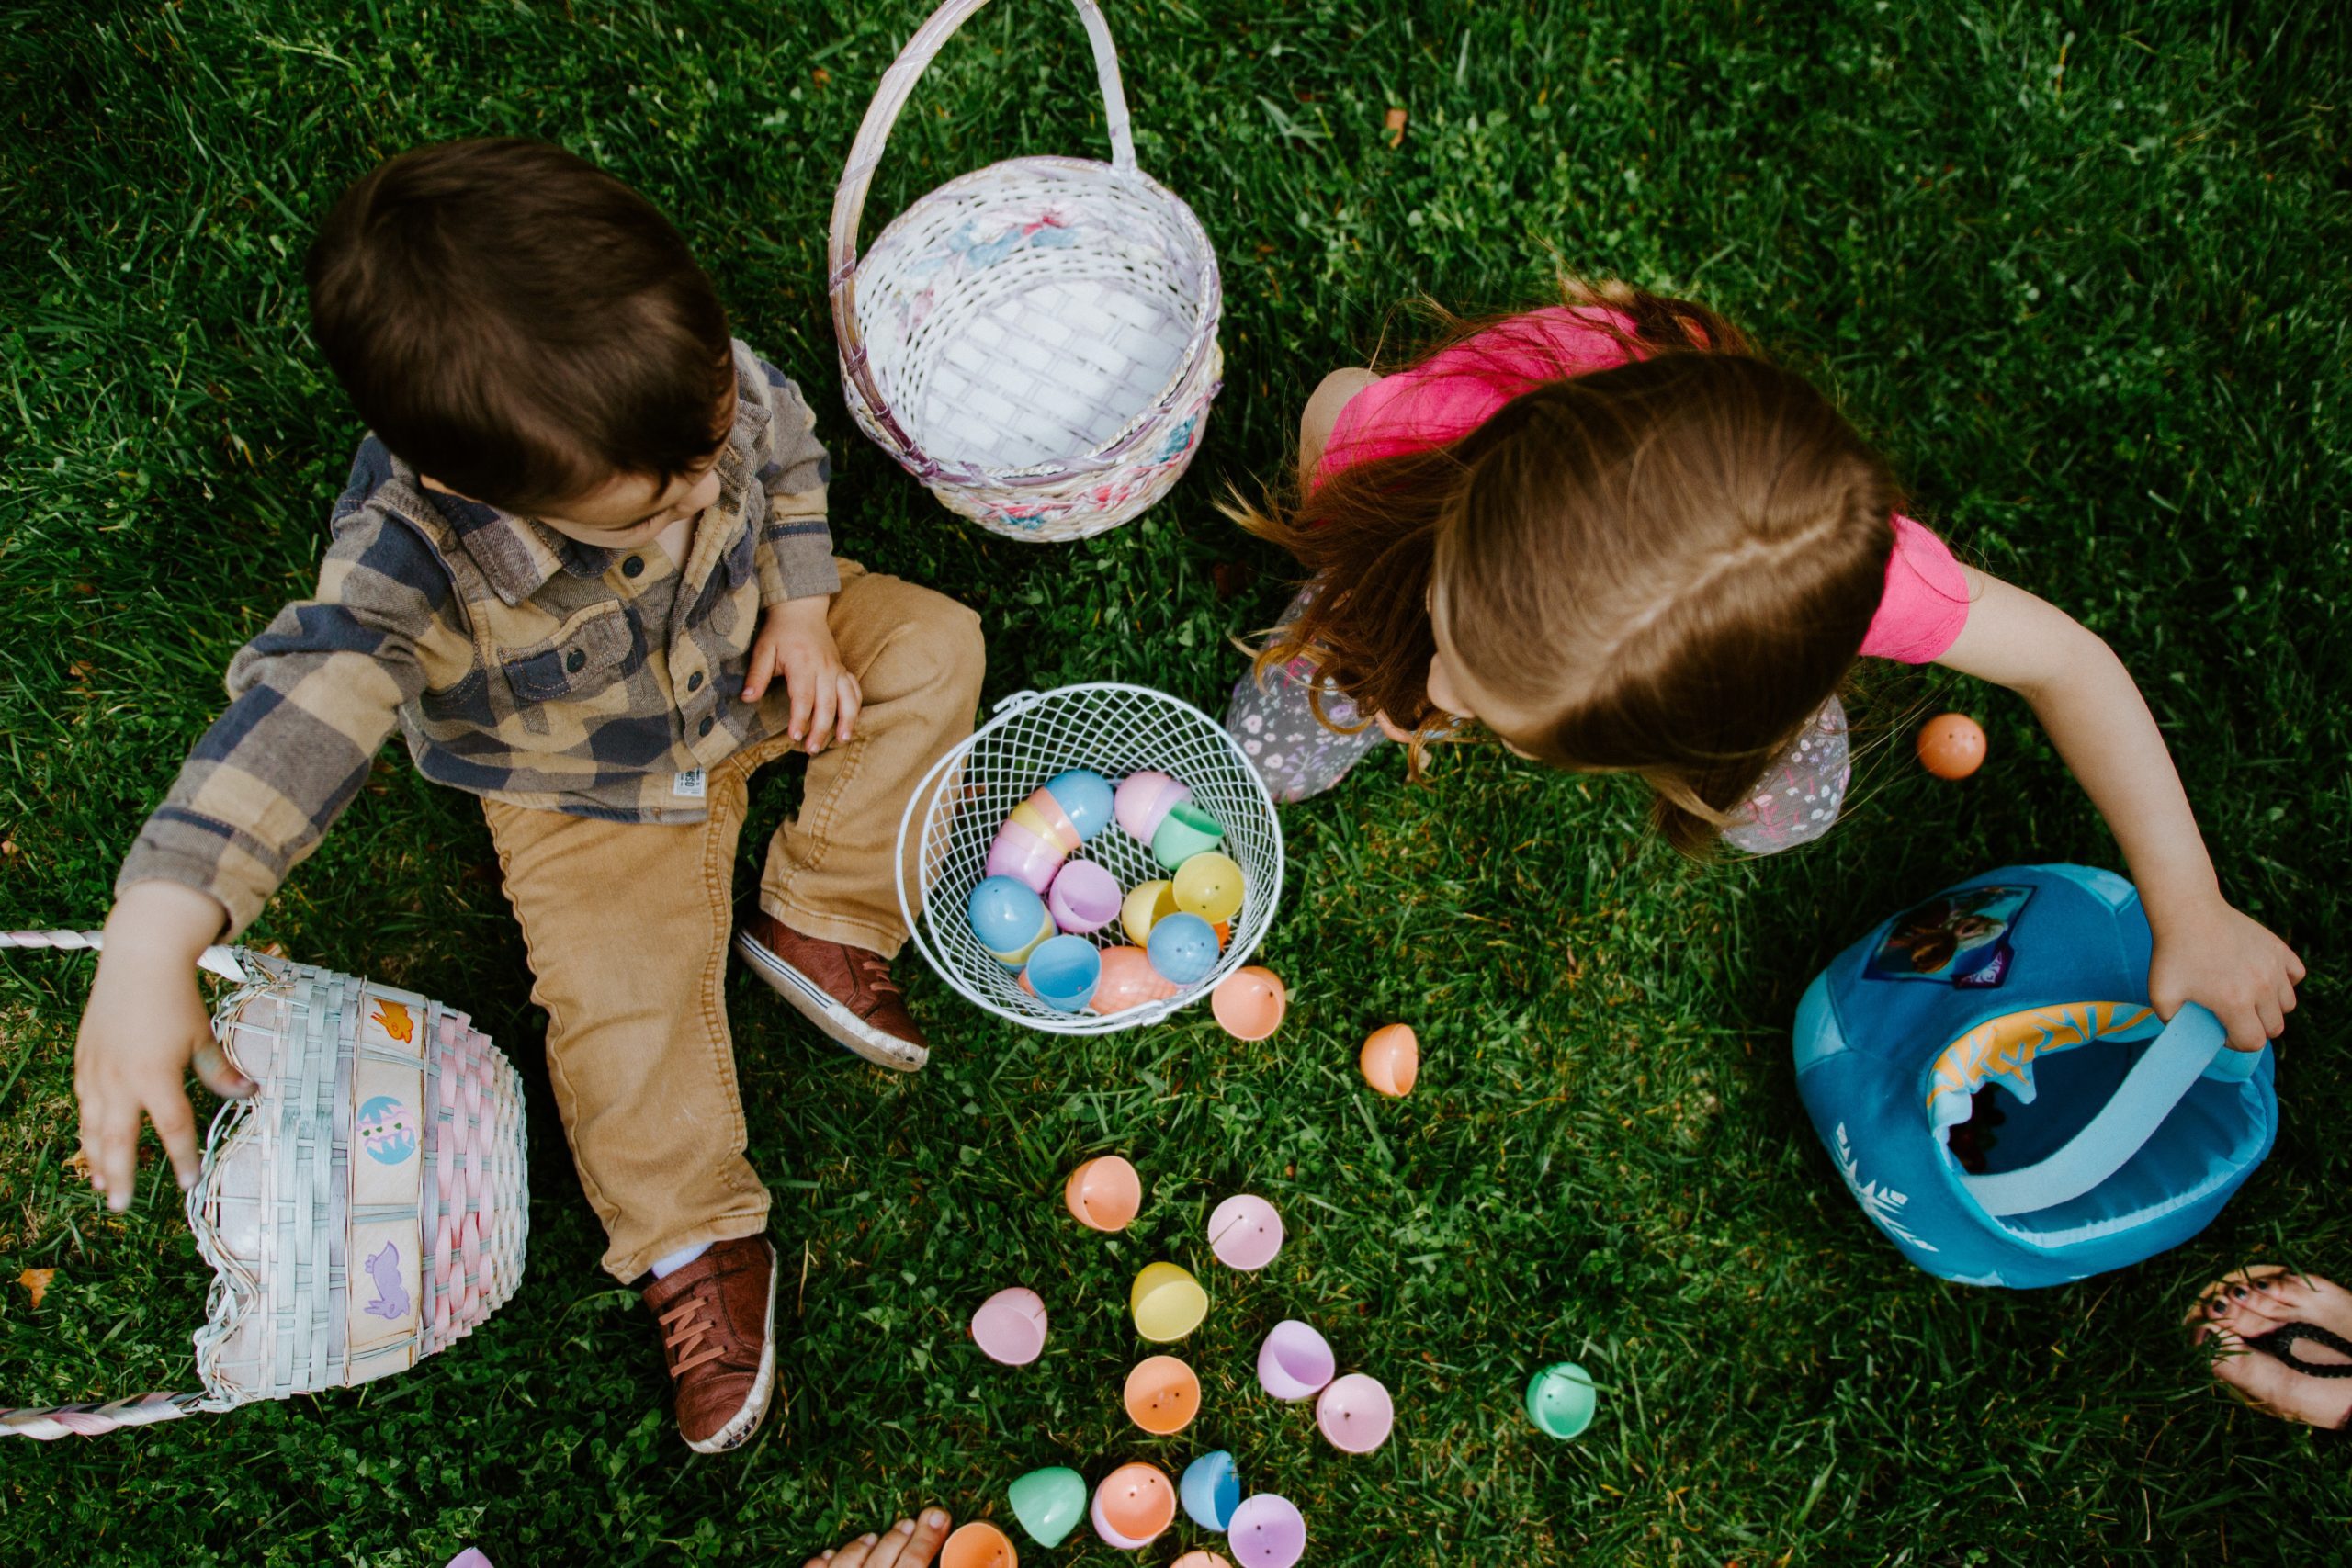 Children playing with Easter eggs